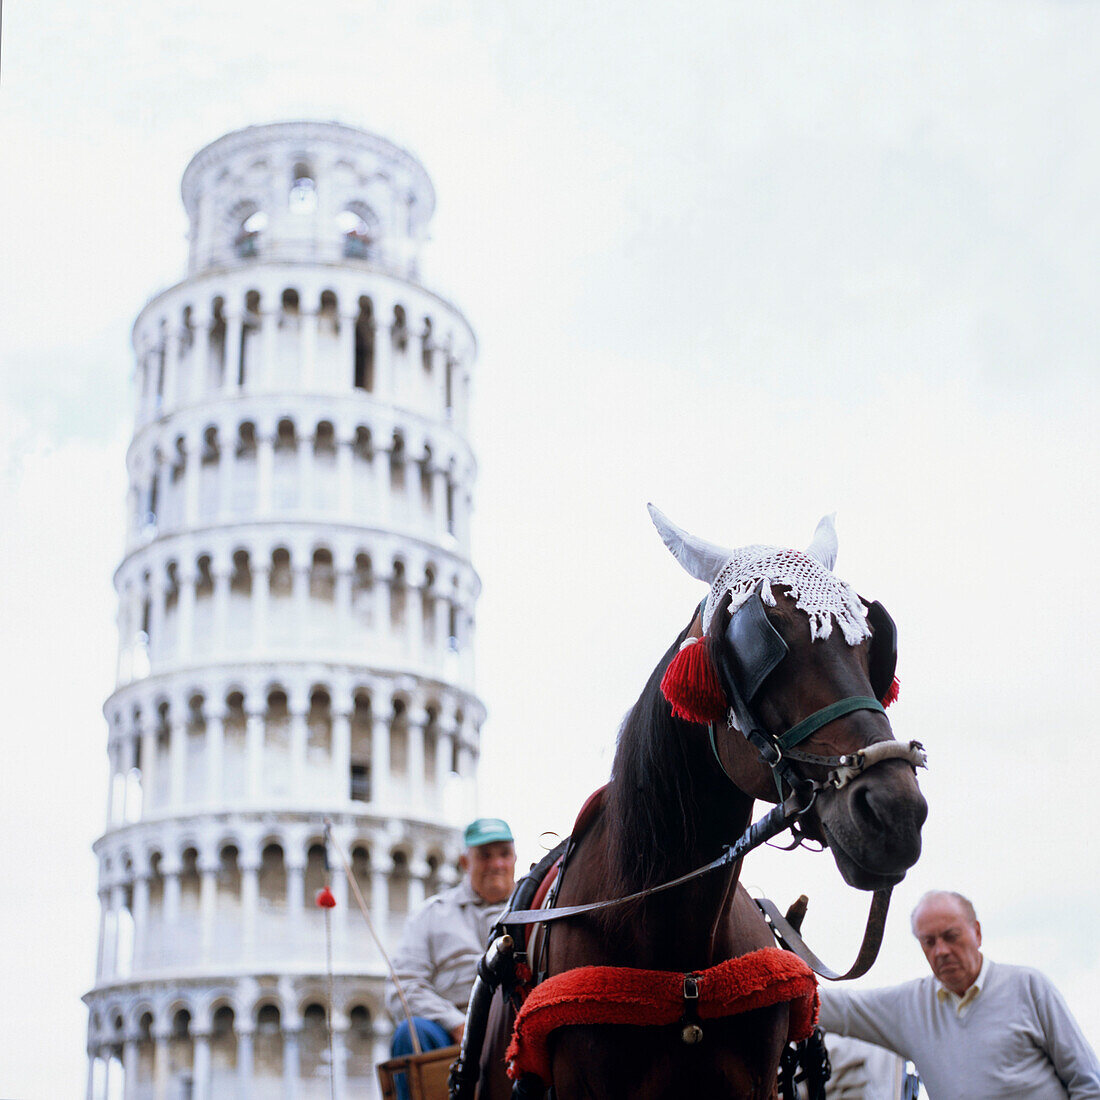 People and horse with carriage in front of leaning tower of Pisa, Italy